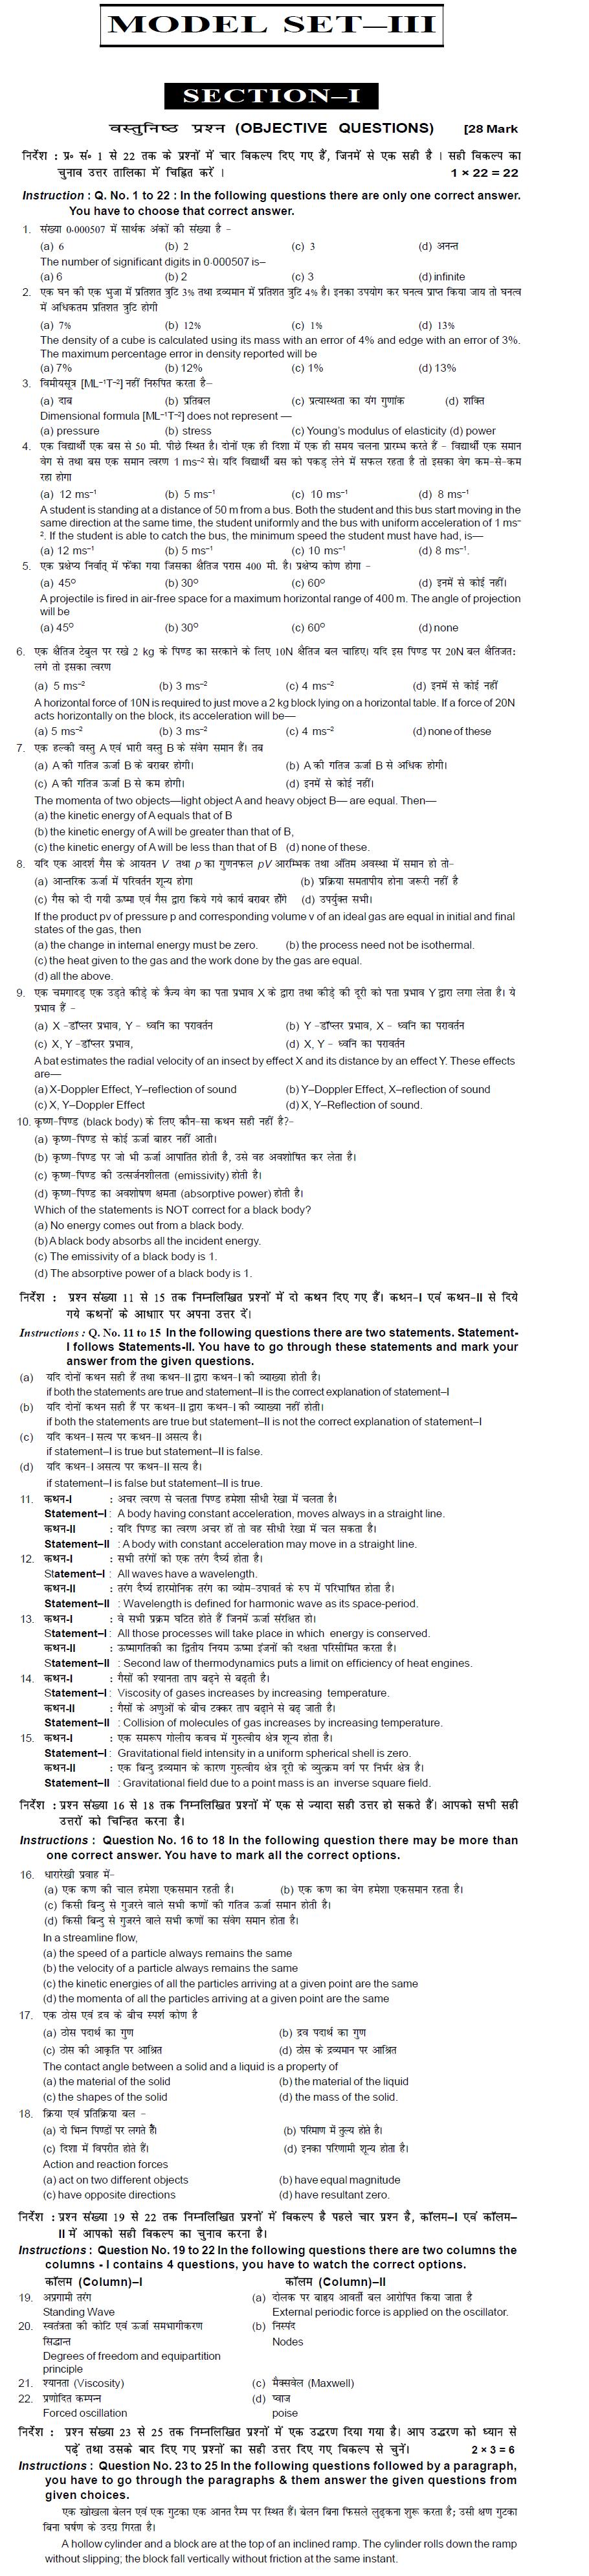 Bihar Board Class XI Science Model Question Papers - Physics